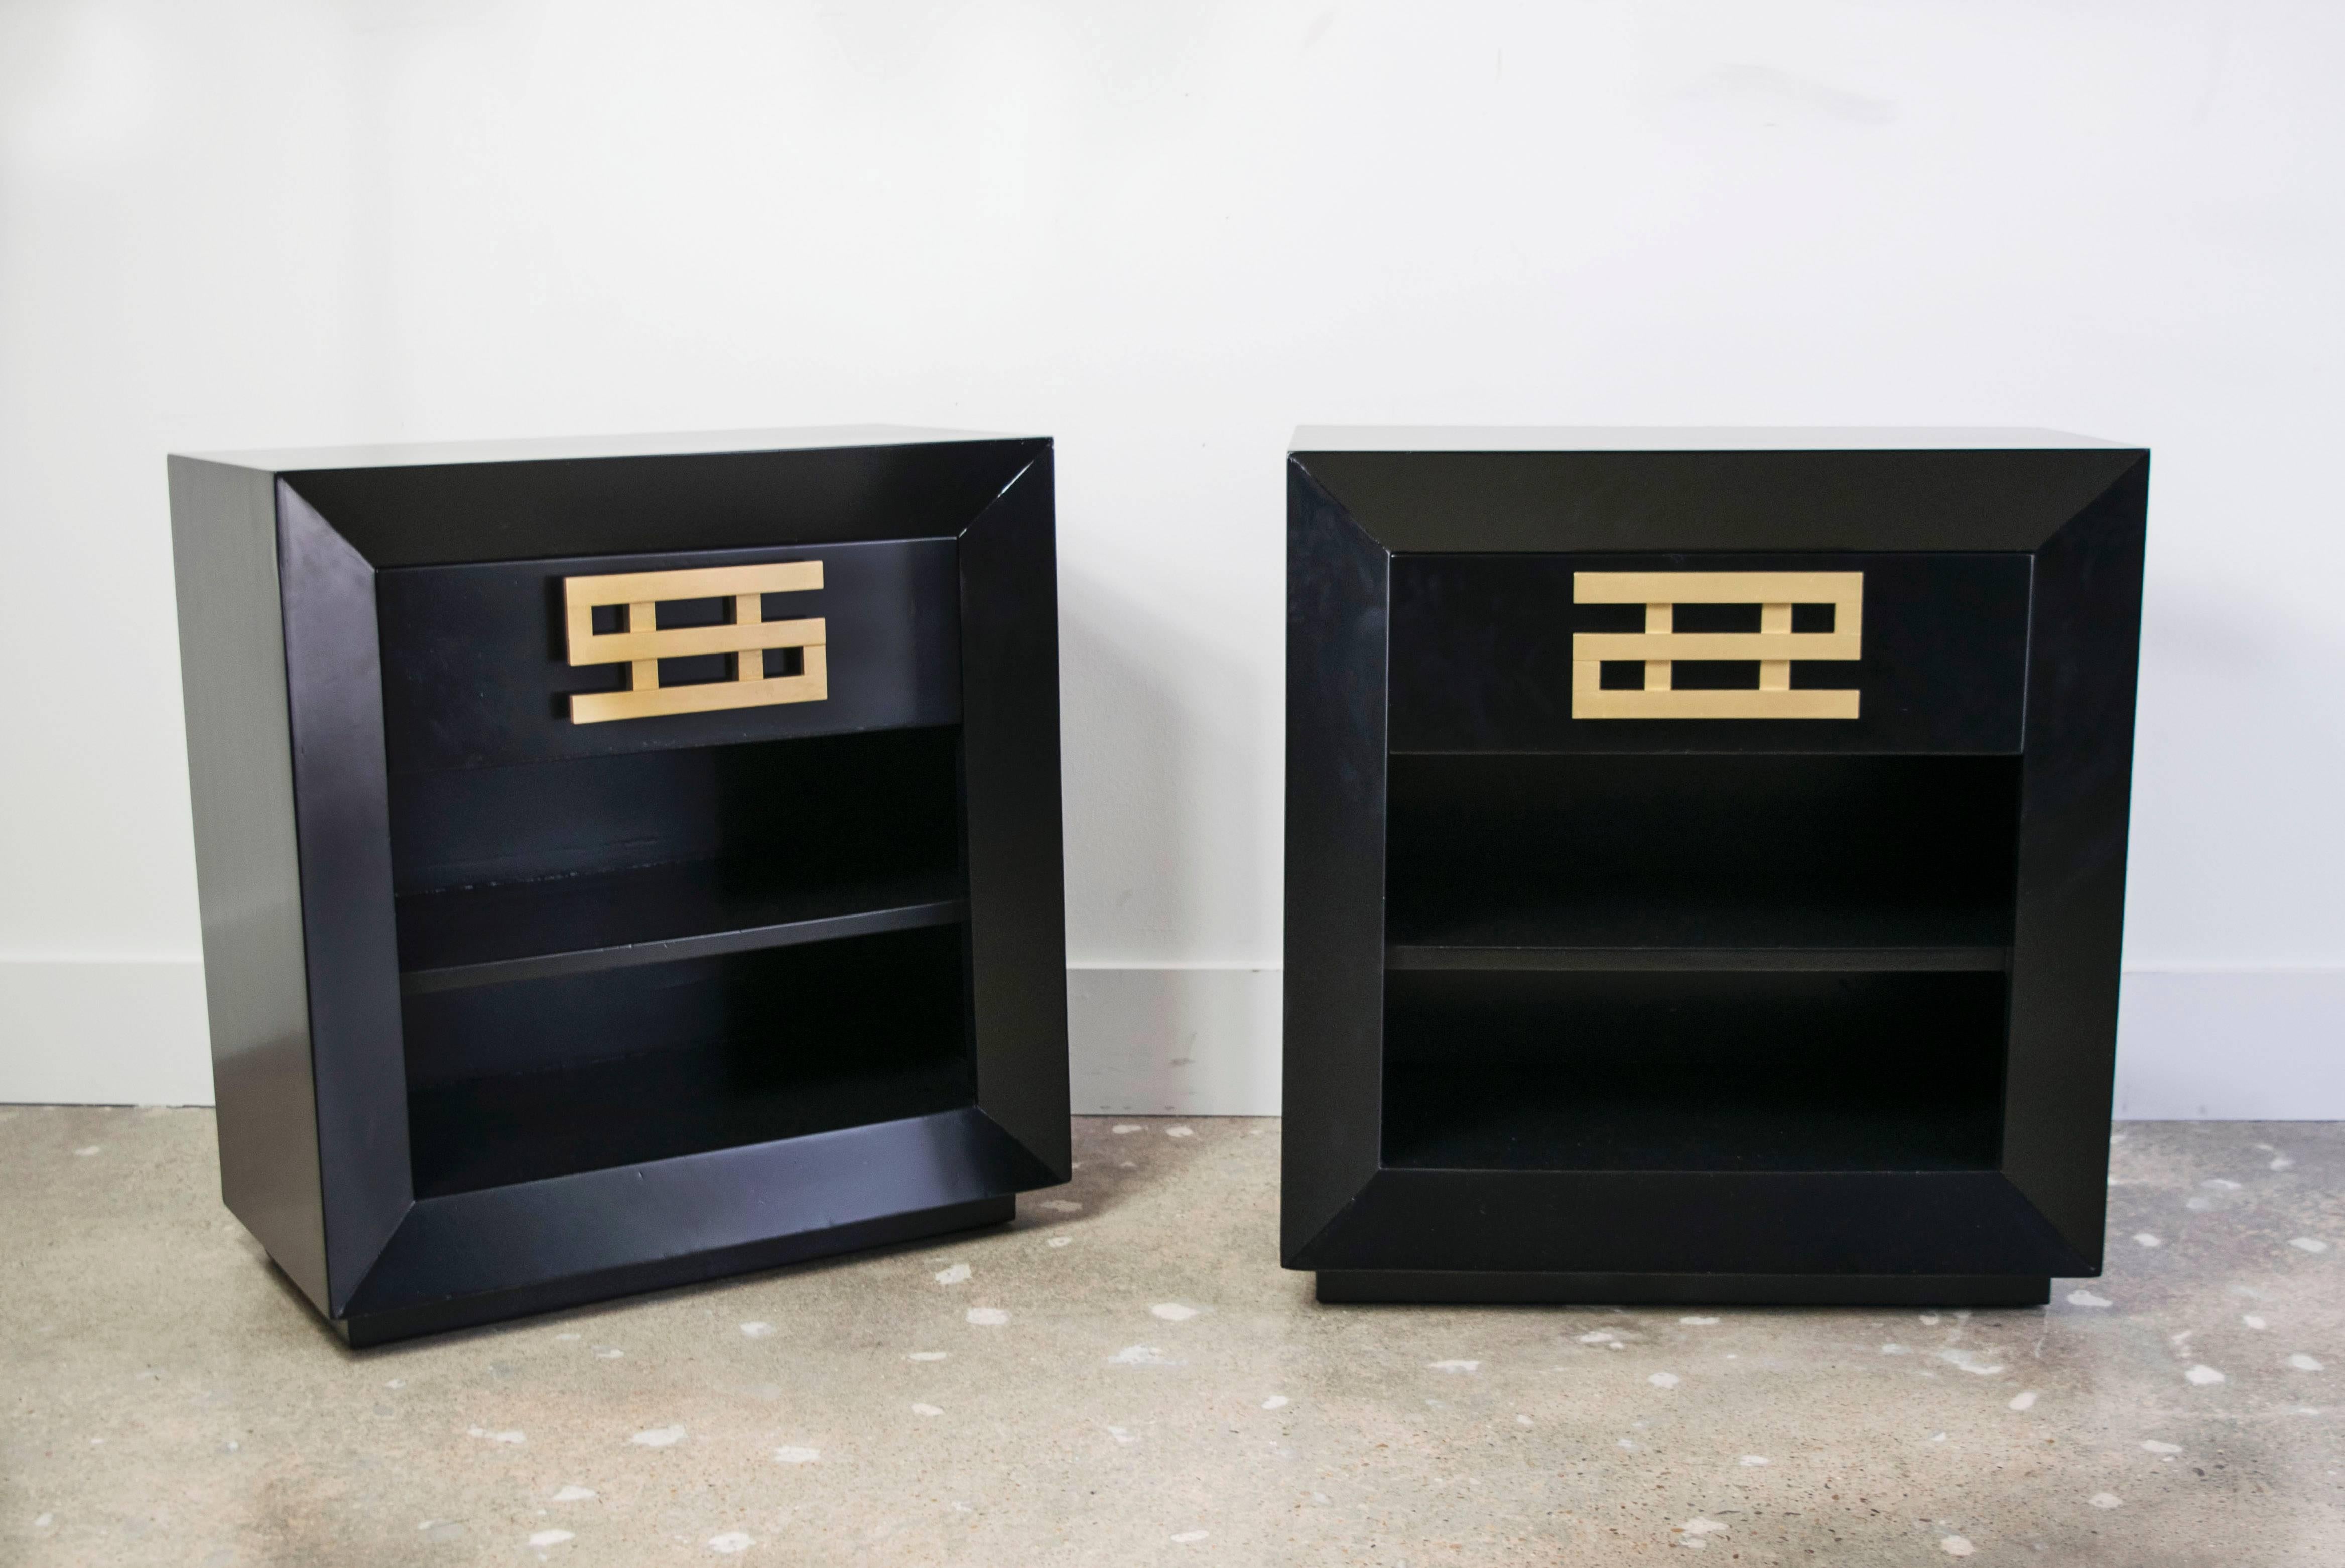 Exceedingly rare ebonized nightstands by Maximilian Karp made in the 1960s in California. The brass hardware pulls were made in the shape of dollar signs after the cartoon character Richie Rich. The nightstands have one drawer and two shelves below.